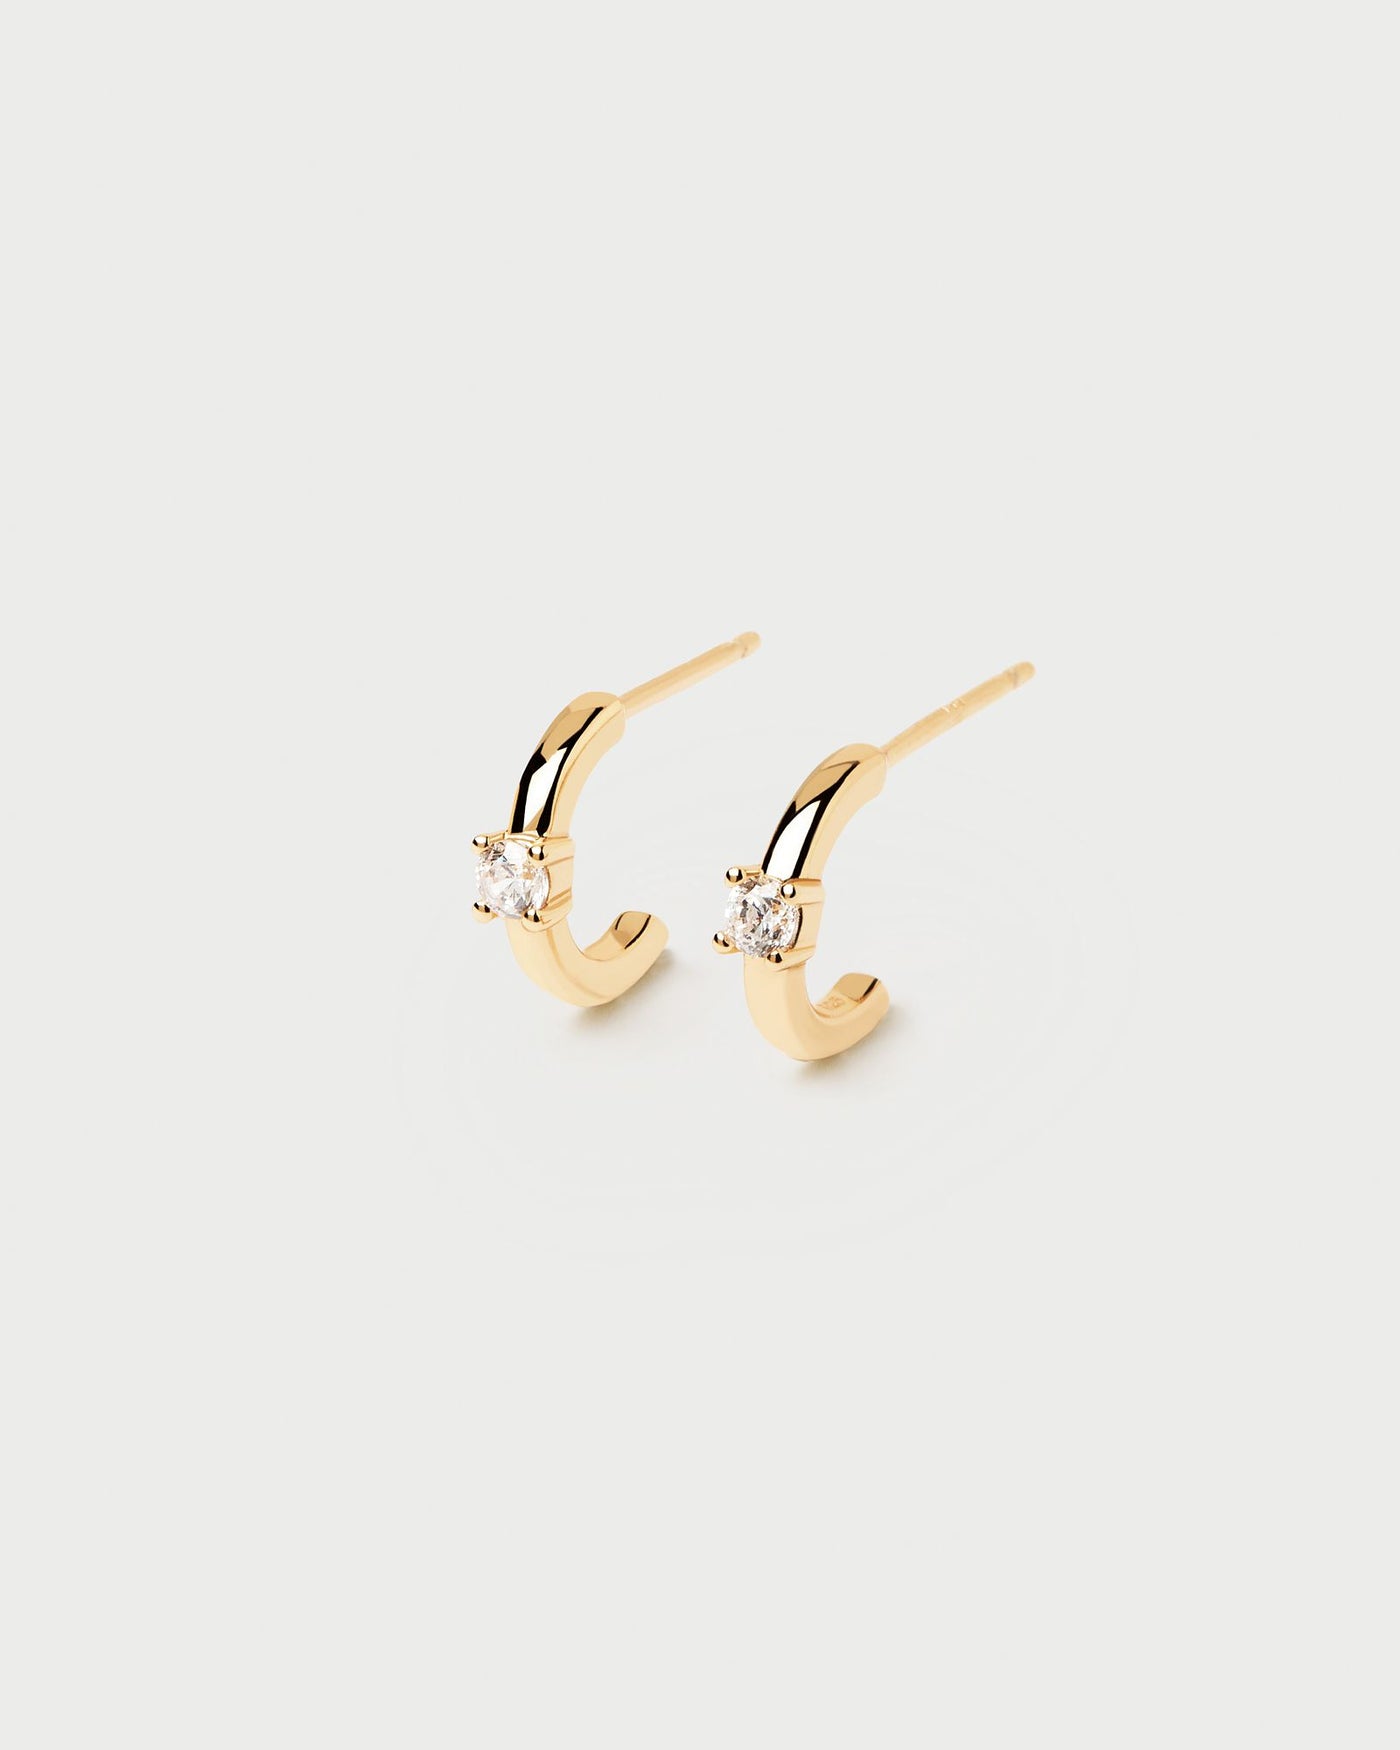 2024 Selection | White Solitary Earrings. 18k gold plated silver c hoops with a round-cut white zirconia stone set on prongs. Get the latest arrival from PDPAOLA. Place your order safely and get this Best Seller. Free Shipping.